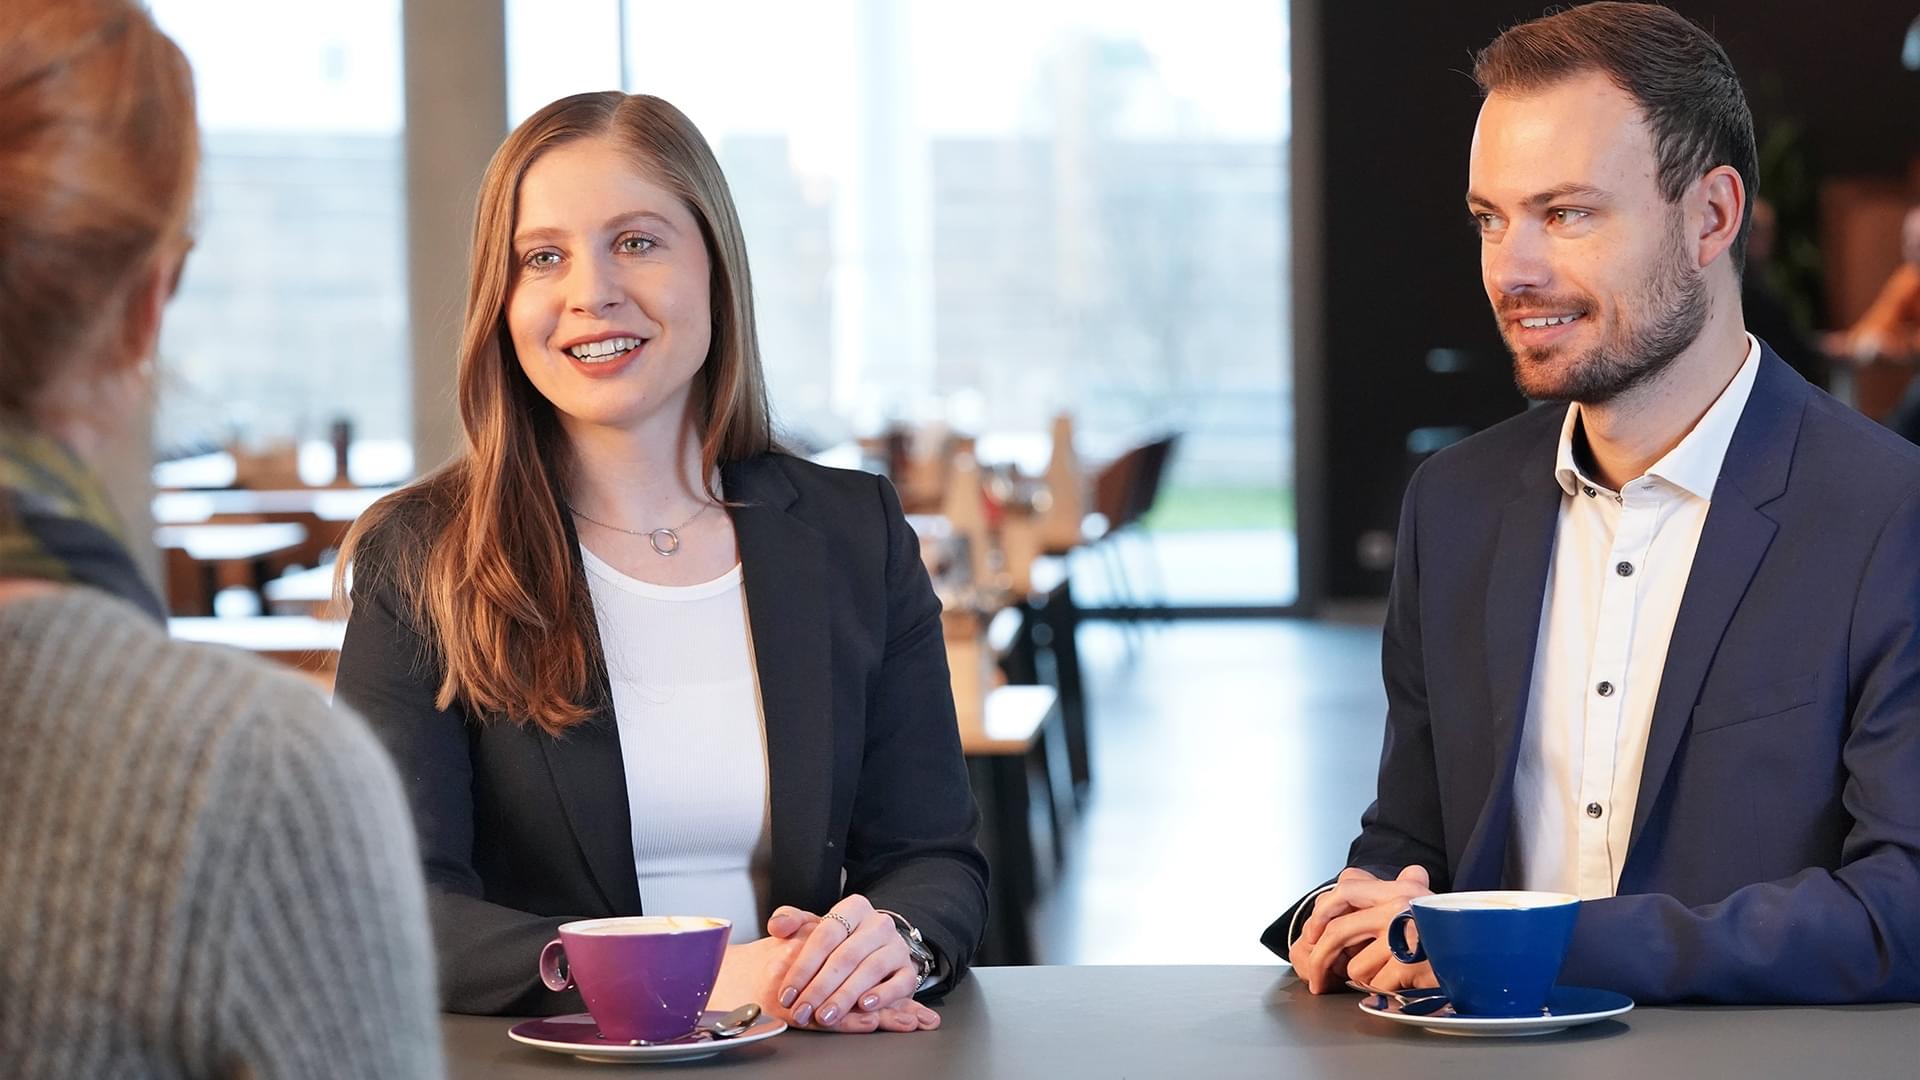 Two trainees, Elina Steinke and Johannes Weth, talk about their experiences with the MEP trainee program at a table in the cafeteria at the Knorr-Bremse site in Munich.